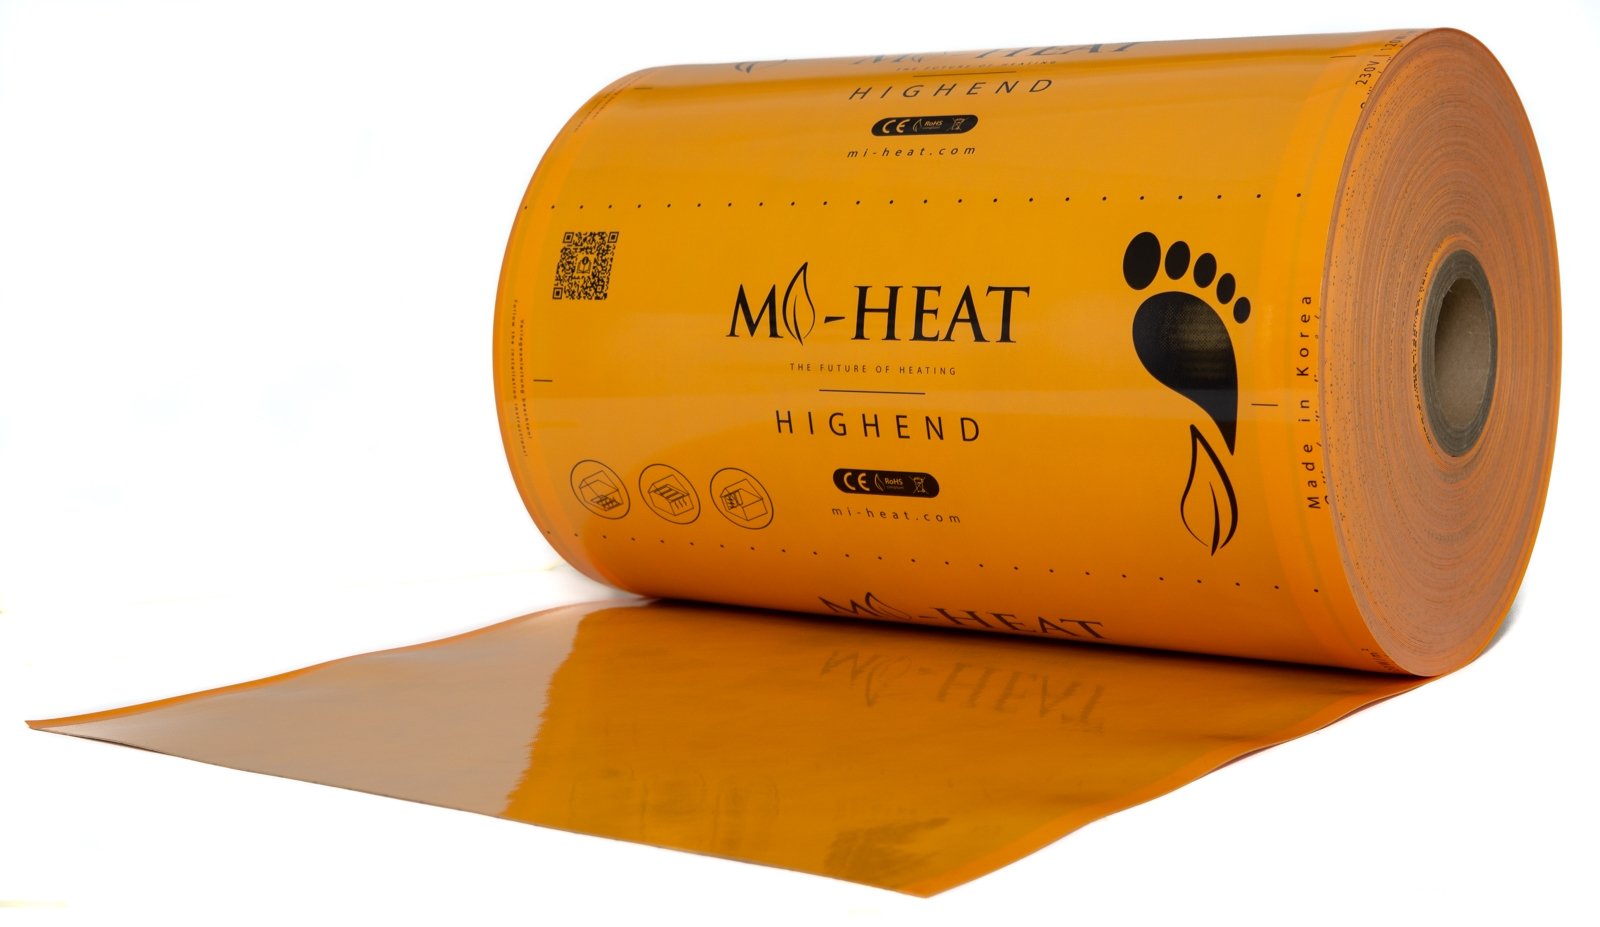 Mi-Heat high end heating film with 200W/m² as a ceiling heater